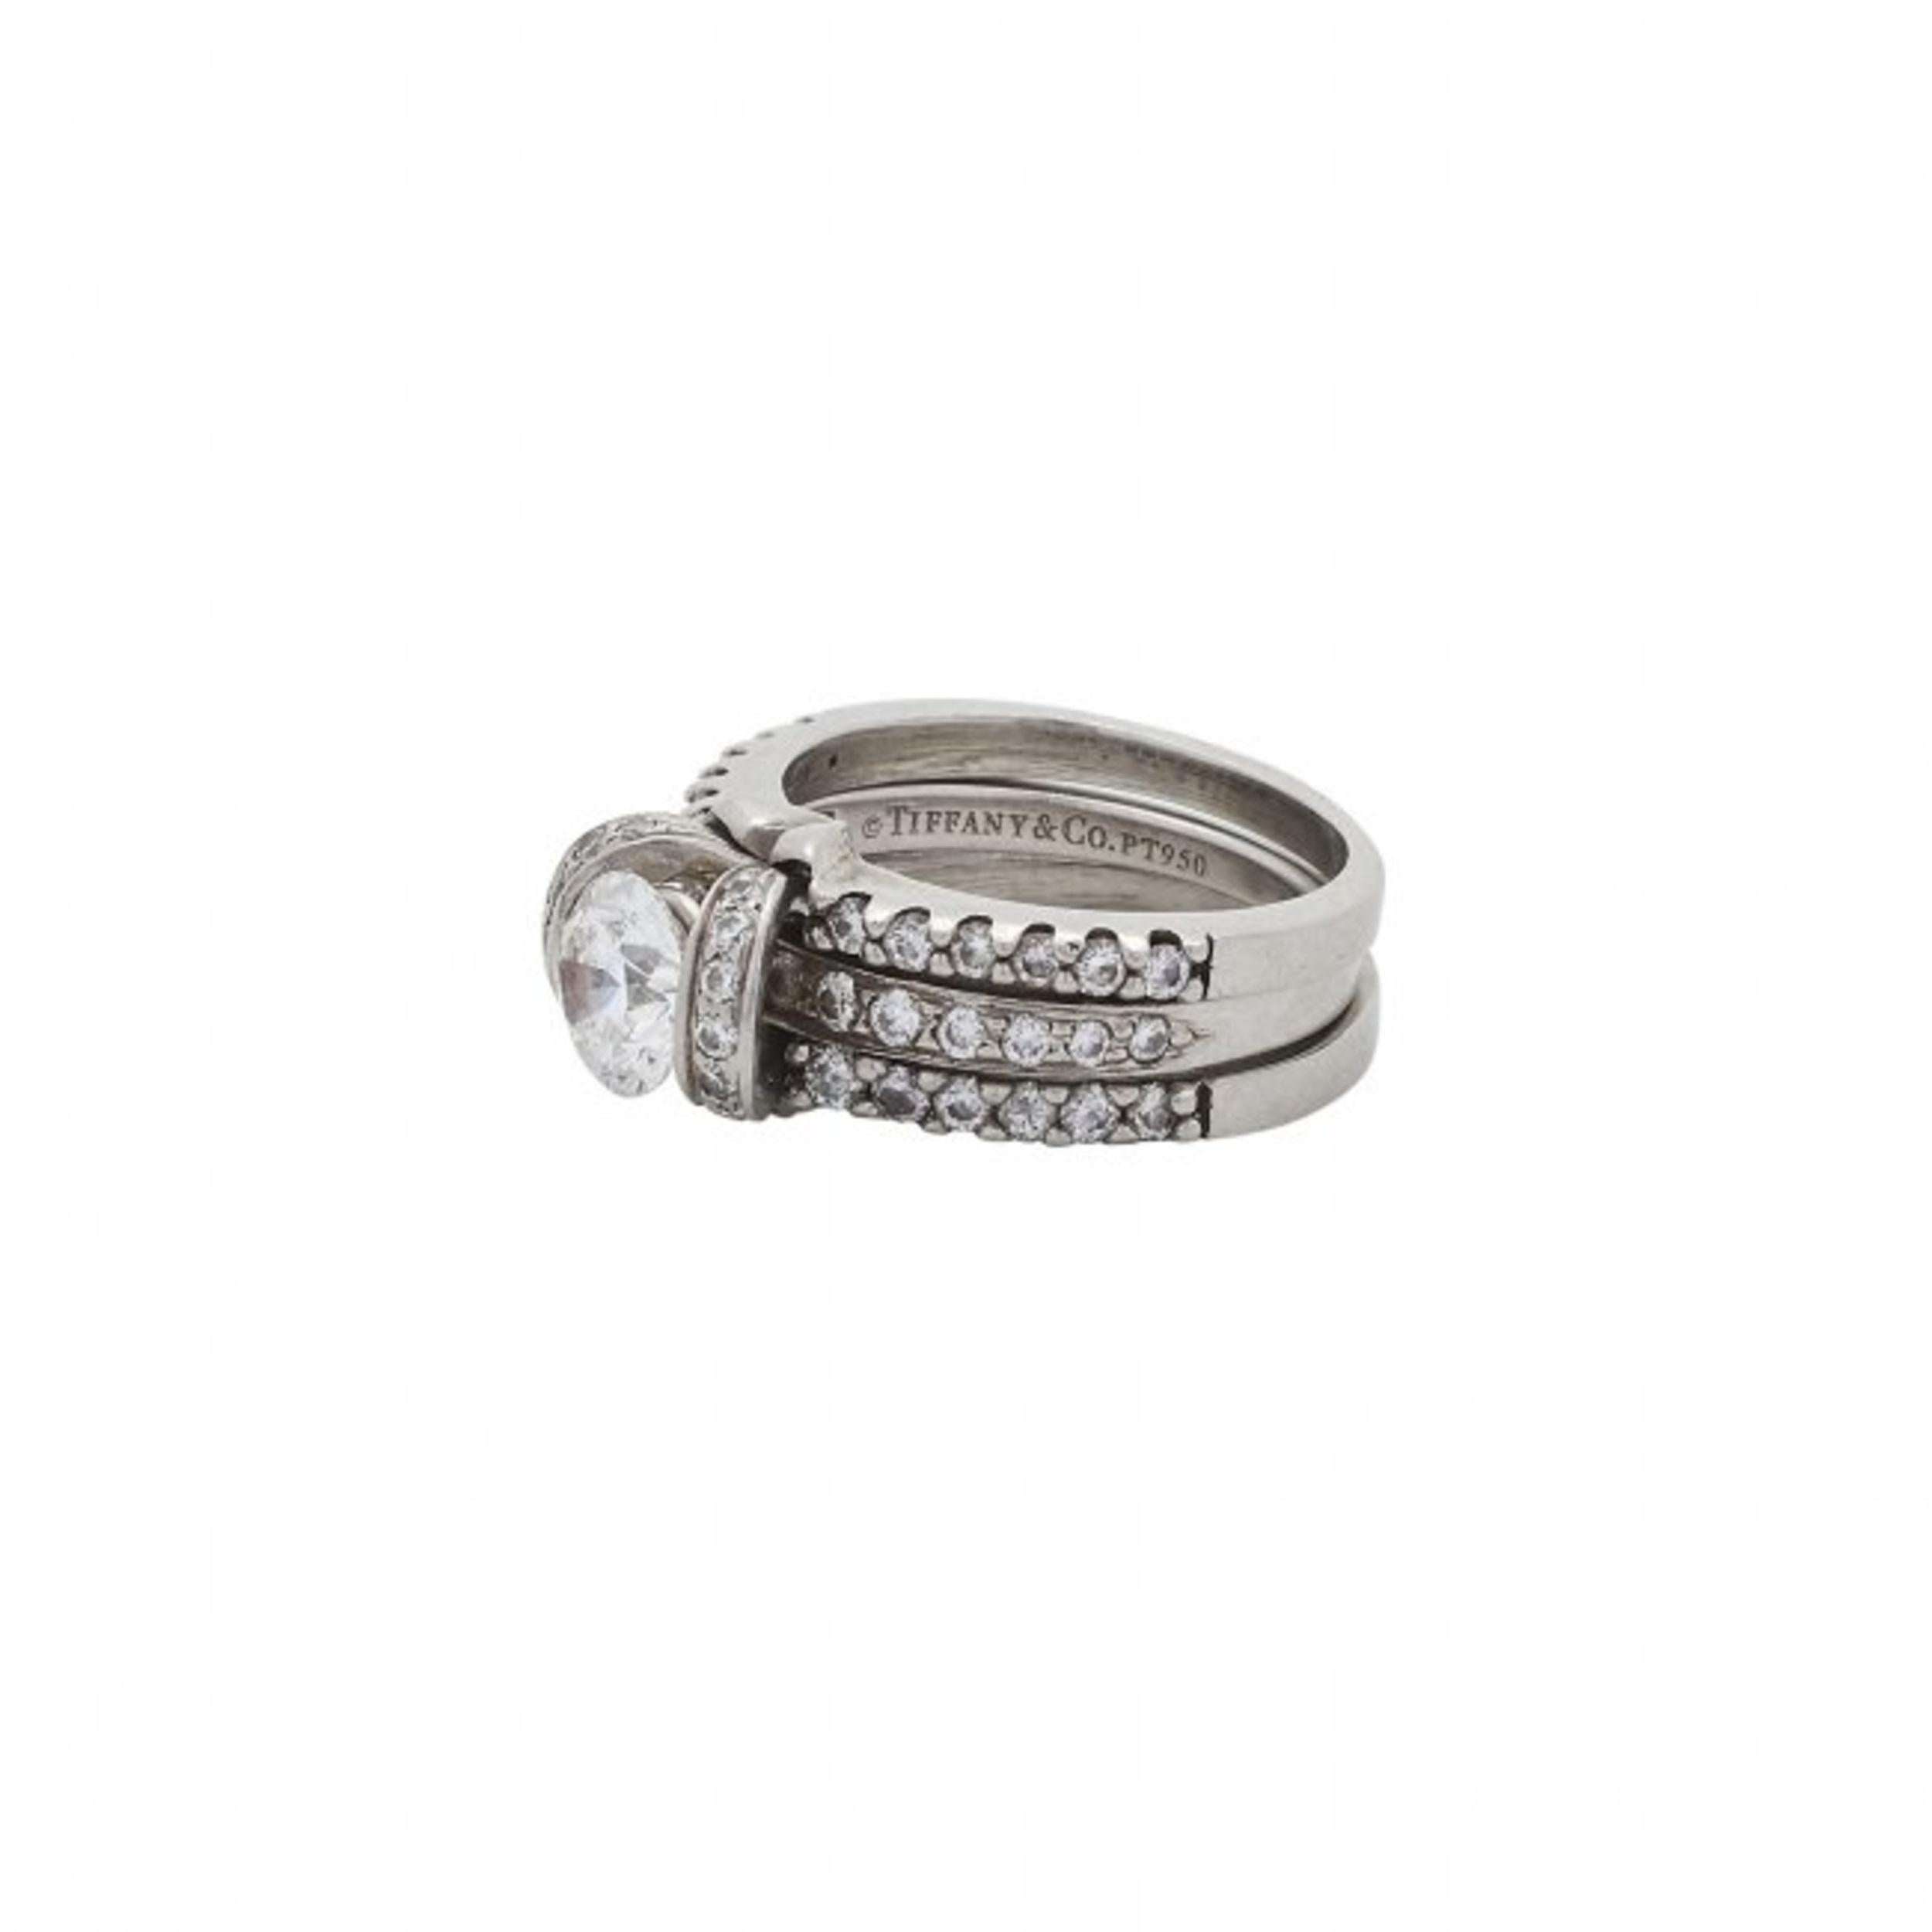 Elegant Platinum & Diamond Ring by Tiffany & Co., with diamond guards, 
The round brilliant diamond tension set round cut diamond weighing approx.
.75 carats
measuring approx. 5.8 mm by 6.02 mm, depth 3.7 mm
size 4

Catalogue note:
The Tiffany